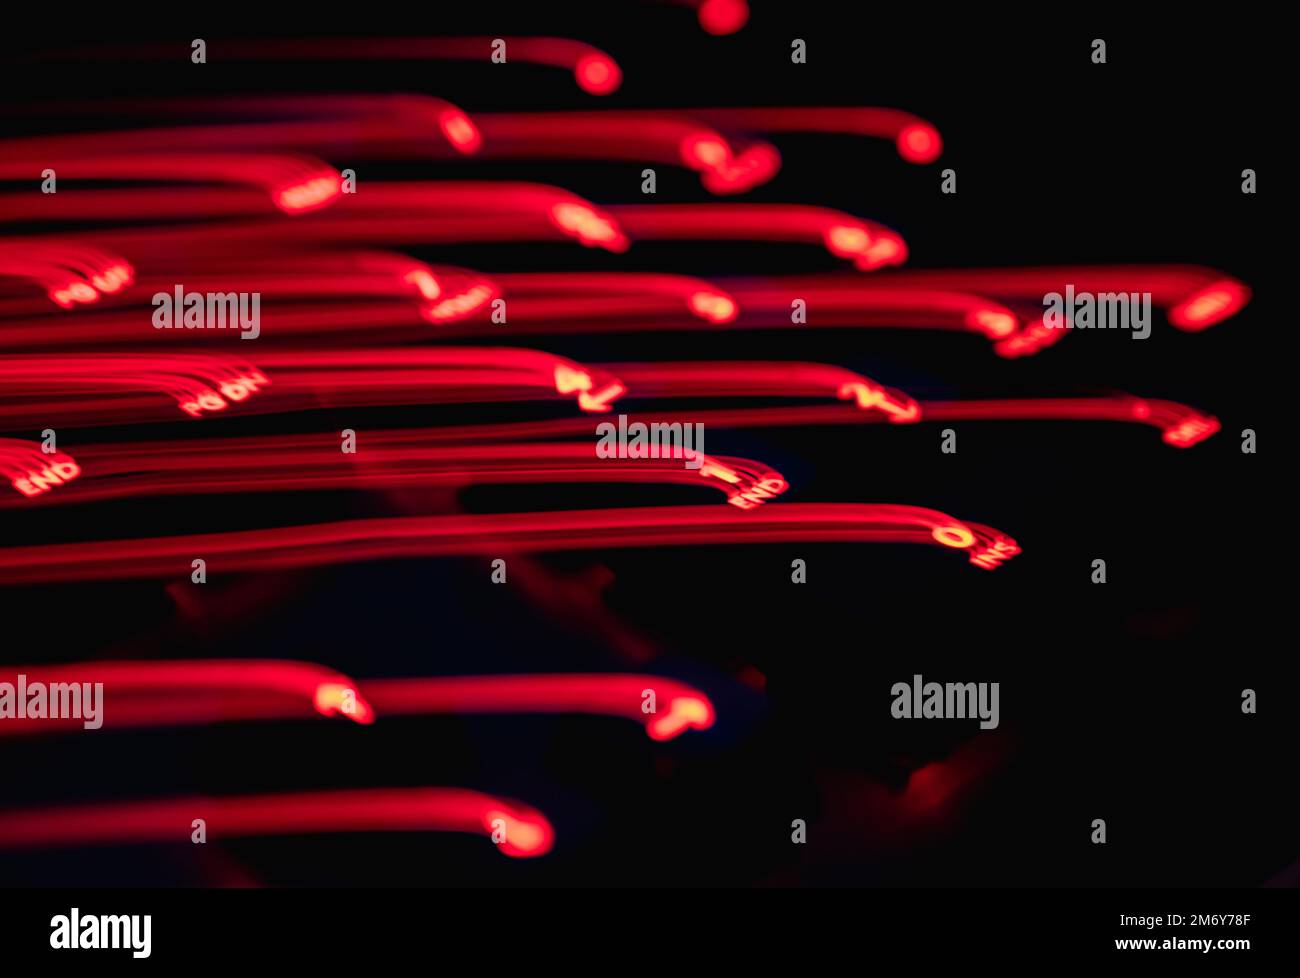 Light painting keyboard letters. Beautiful colorful background. Long exposure light painting.Red curved lines in vibrant neon on black background. Stock Photo